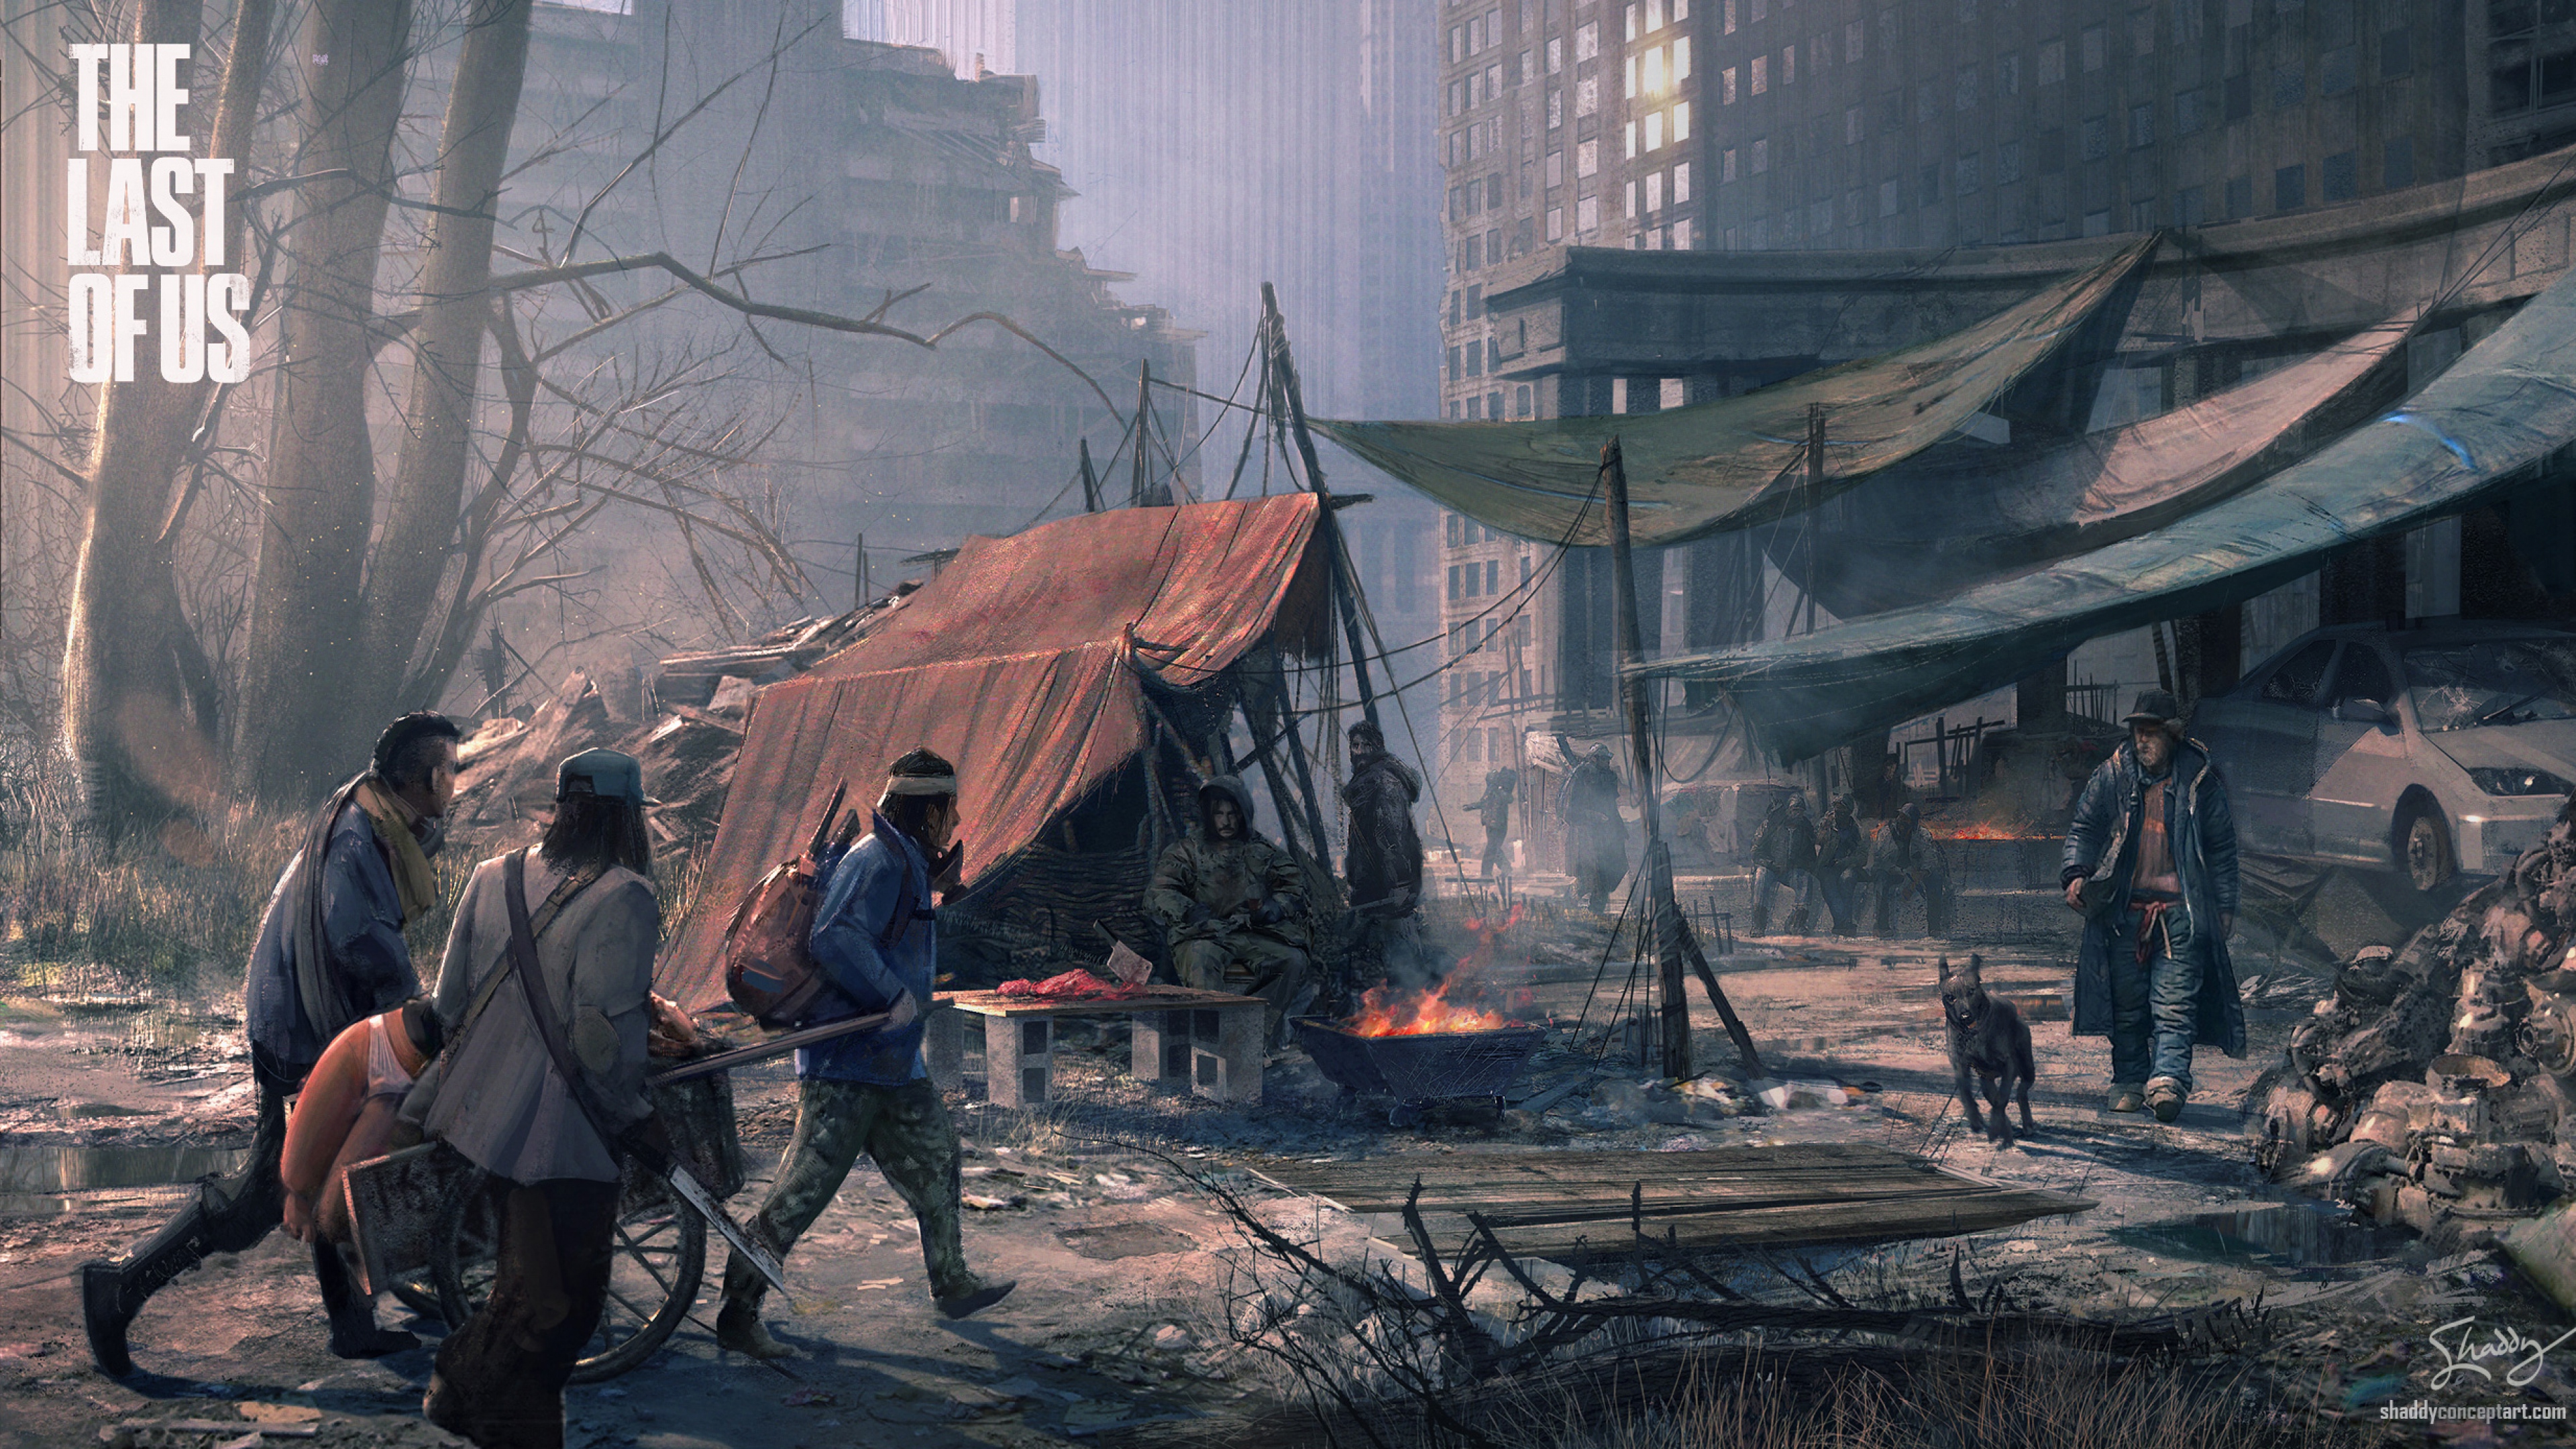 Download Wallpaper 3840x2160 The last of us, City, Doomsday